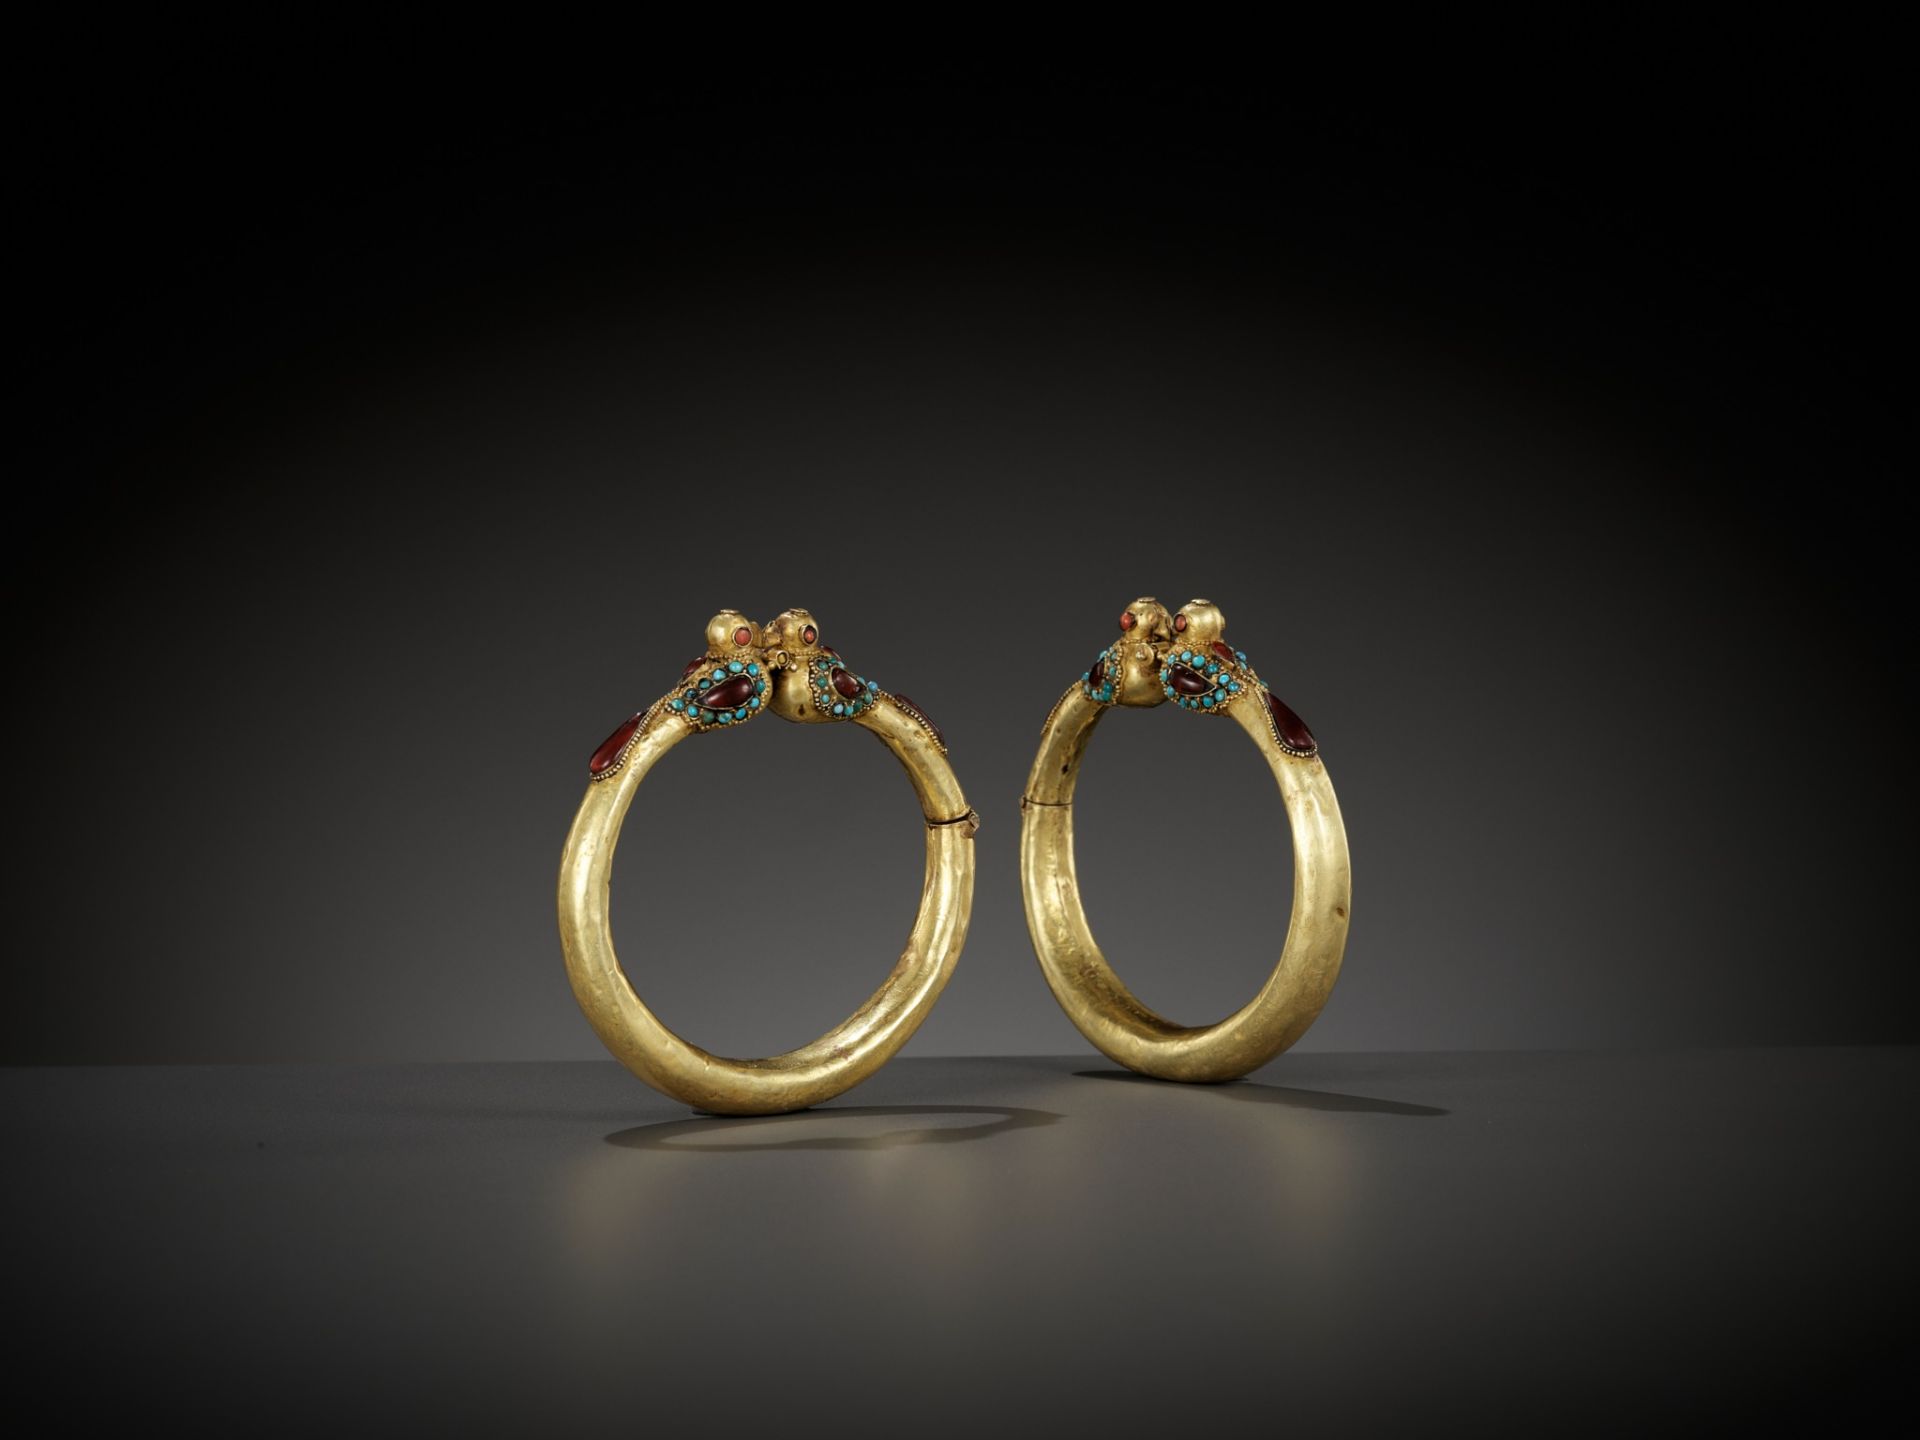 A PAIR OF GOLD 'BIRD' BANGLES, PERSIA, 11TH TO 12TH CENTURY - Image 2 of 9